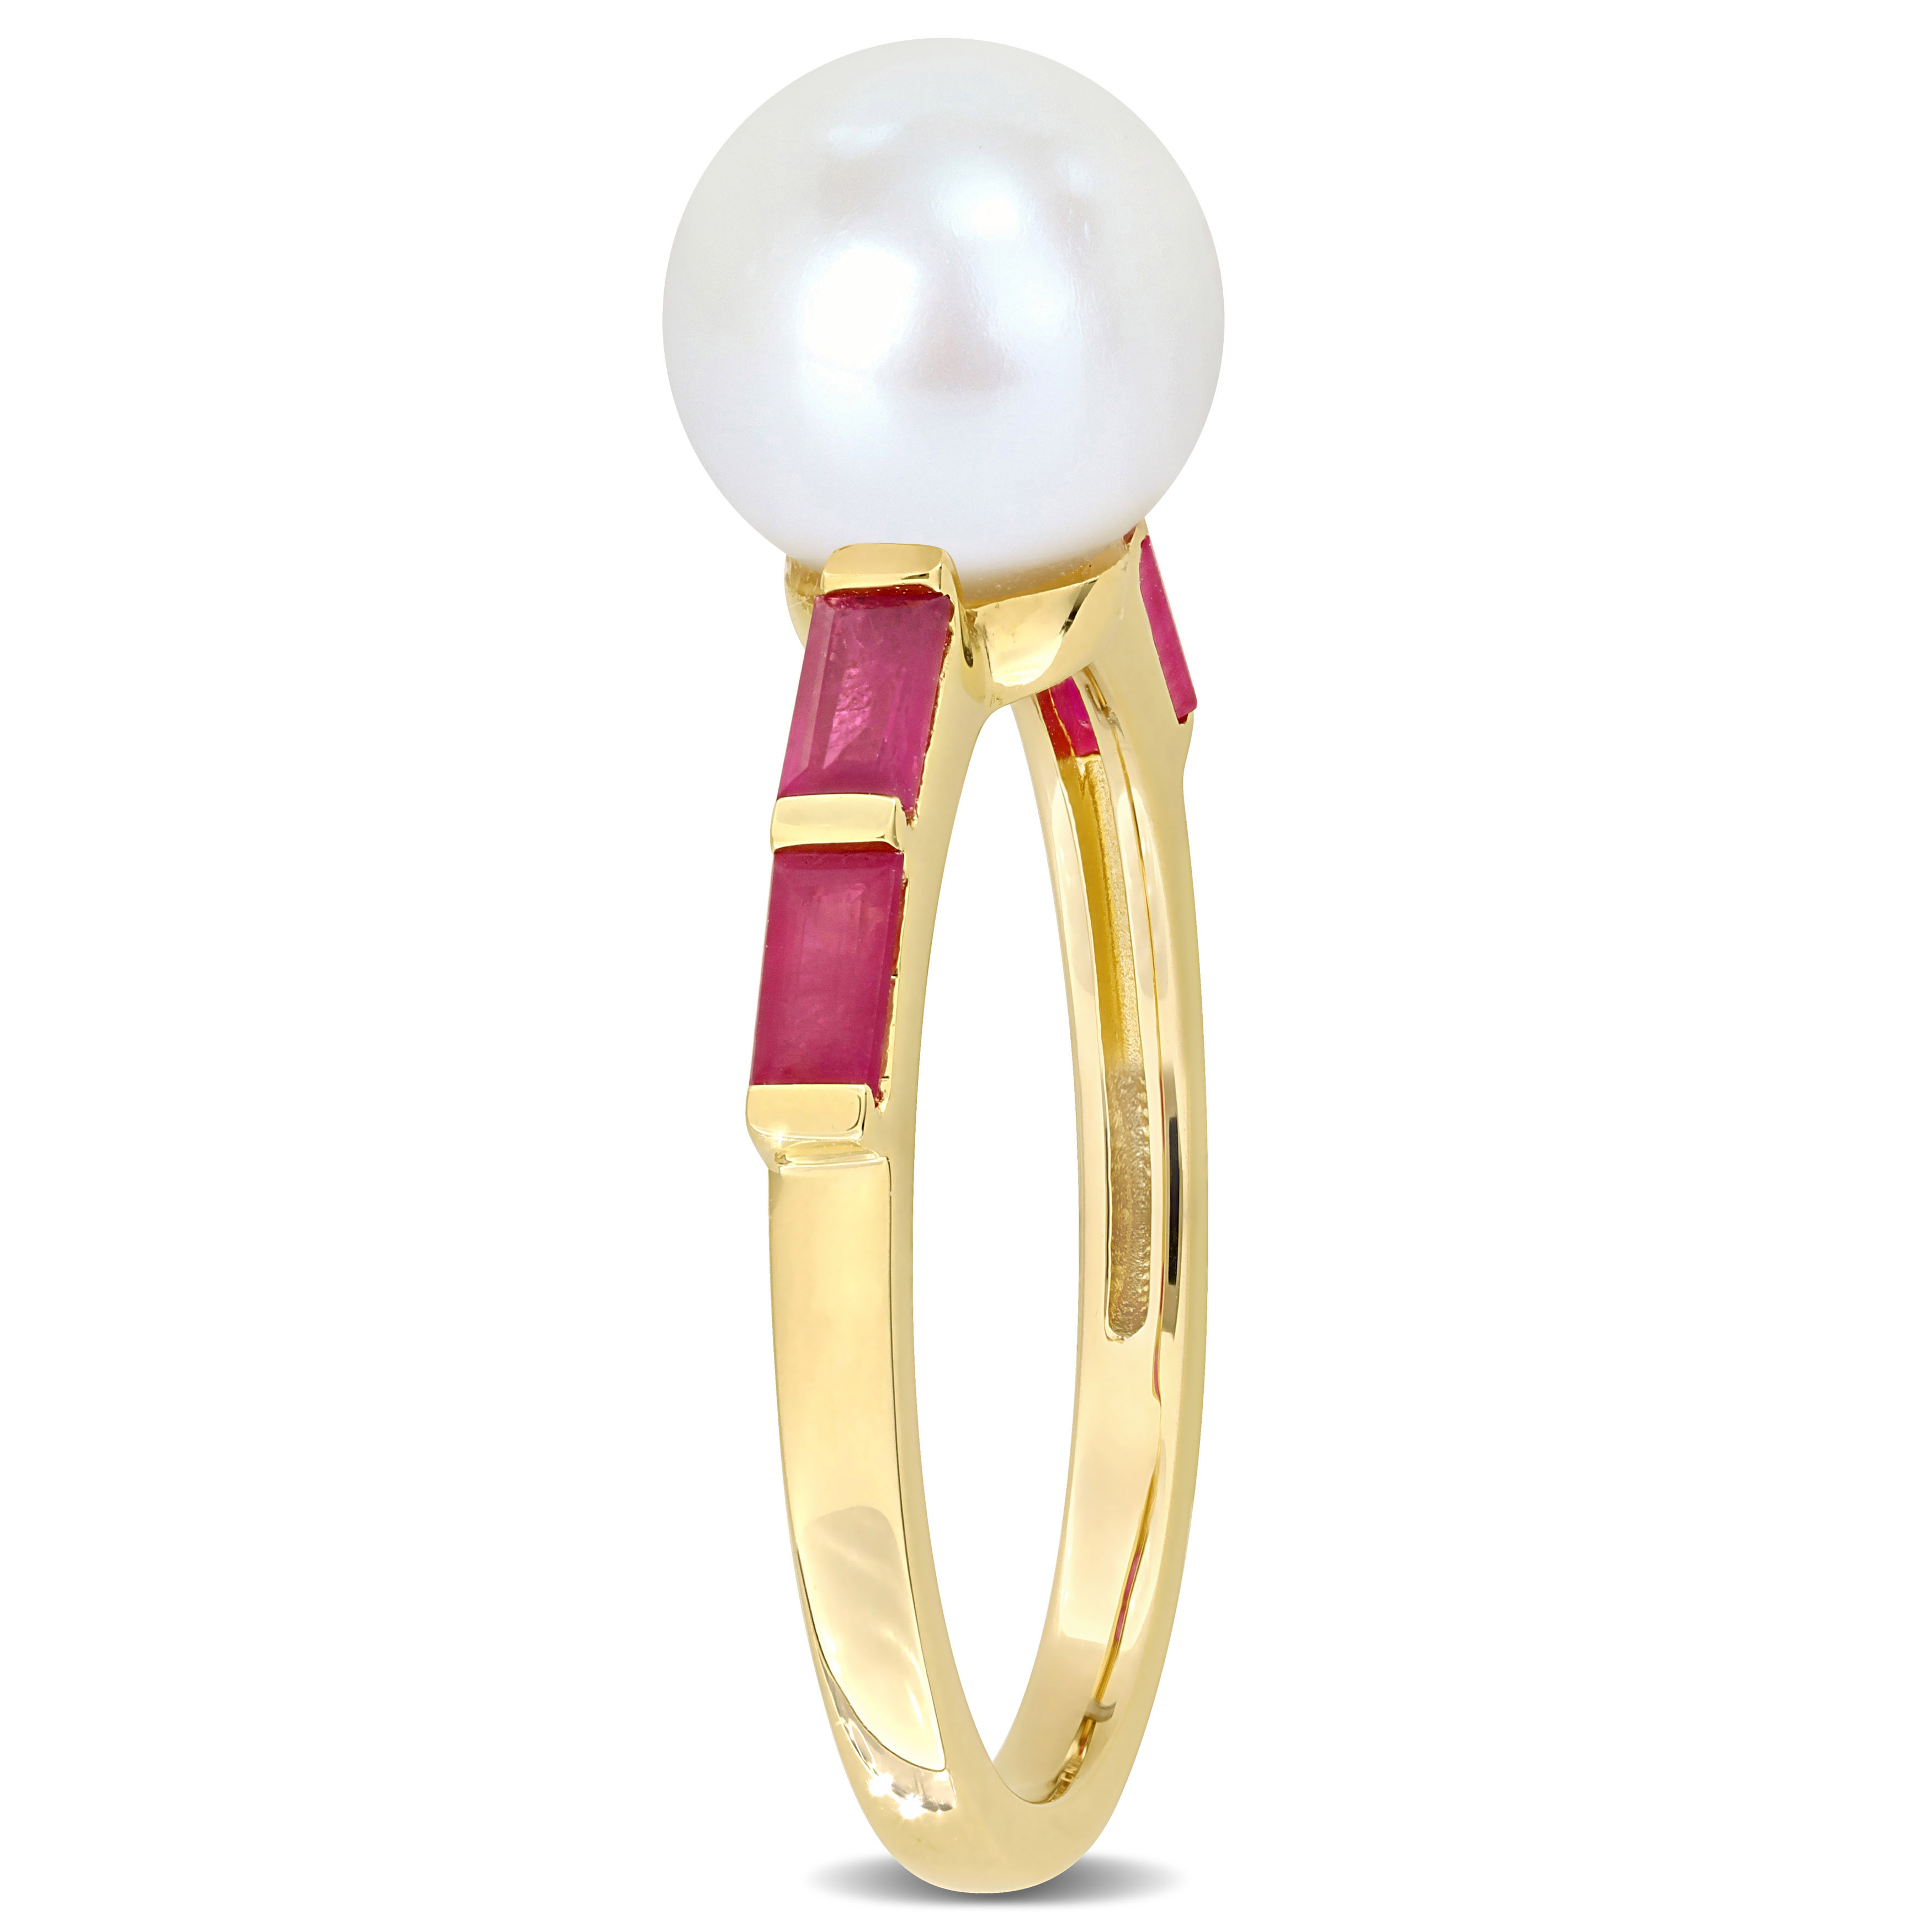 8-8.5 MM Freshwater Cultured Pearl 3/4 CT TGW Baguette Shaped Ruby Ring in 10k Yellow Gold